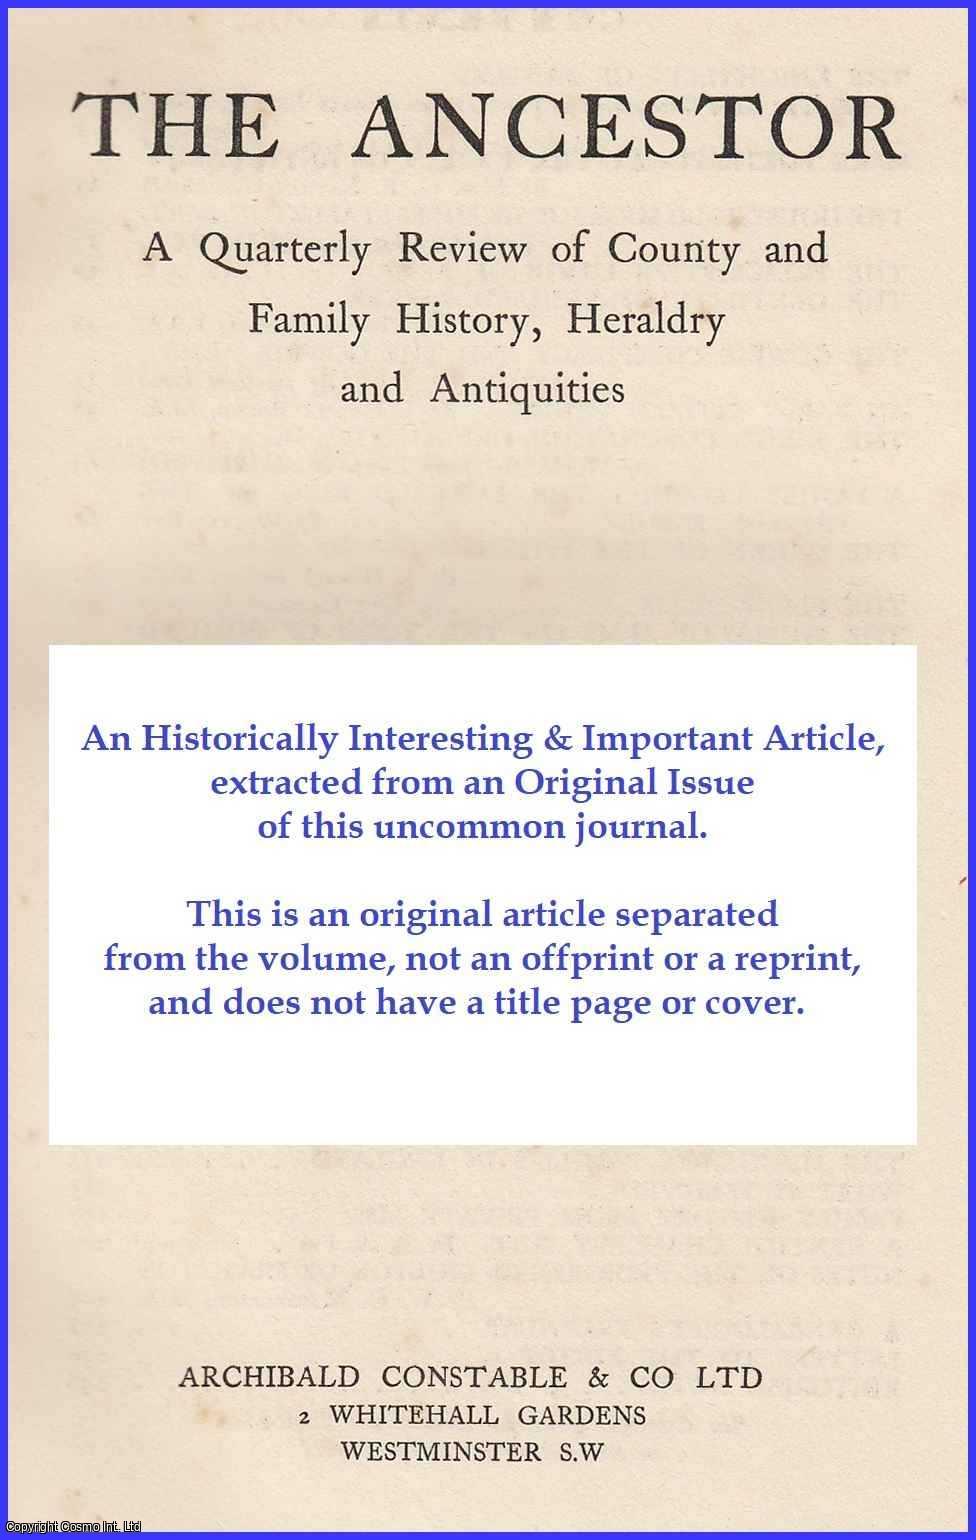 J. Horace Round - The Beresfords' Origin And Arms. An original article from The Ancestor, a Quarterly Review of County & Family History, Heraldry and Antiquities, 1905.